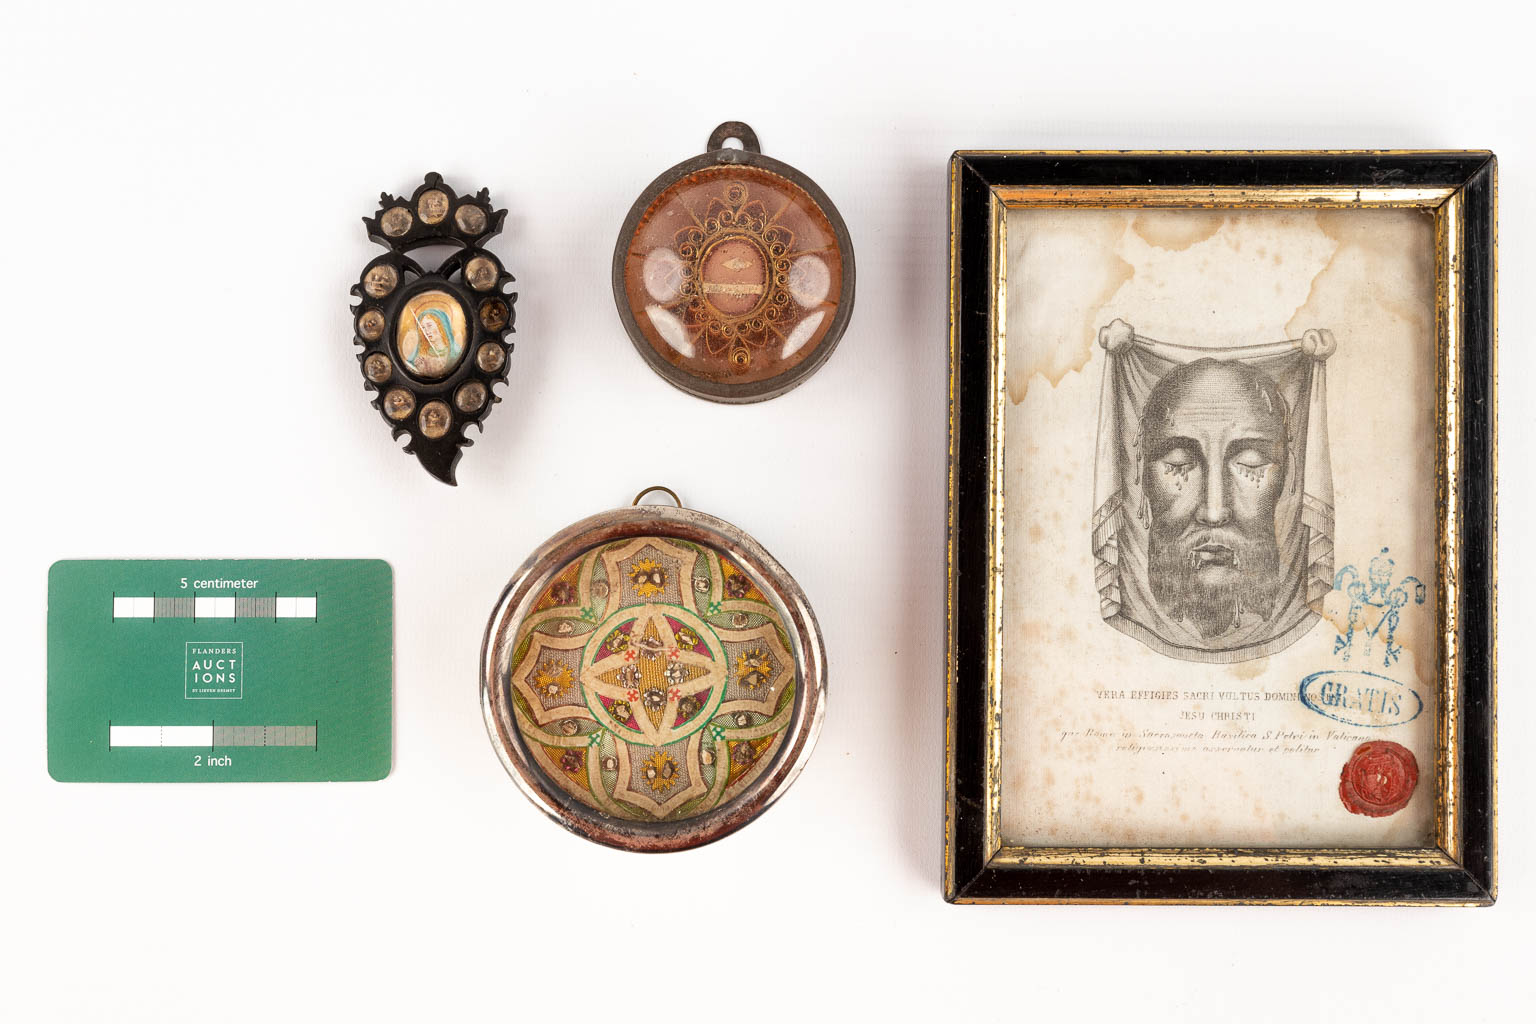 A small collection of relics and reliquary items, The Veil of Veronica, a relic in the shape of a sacred heart and more. (W:13 x